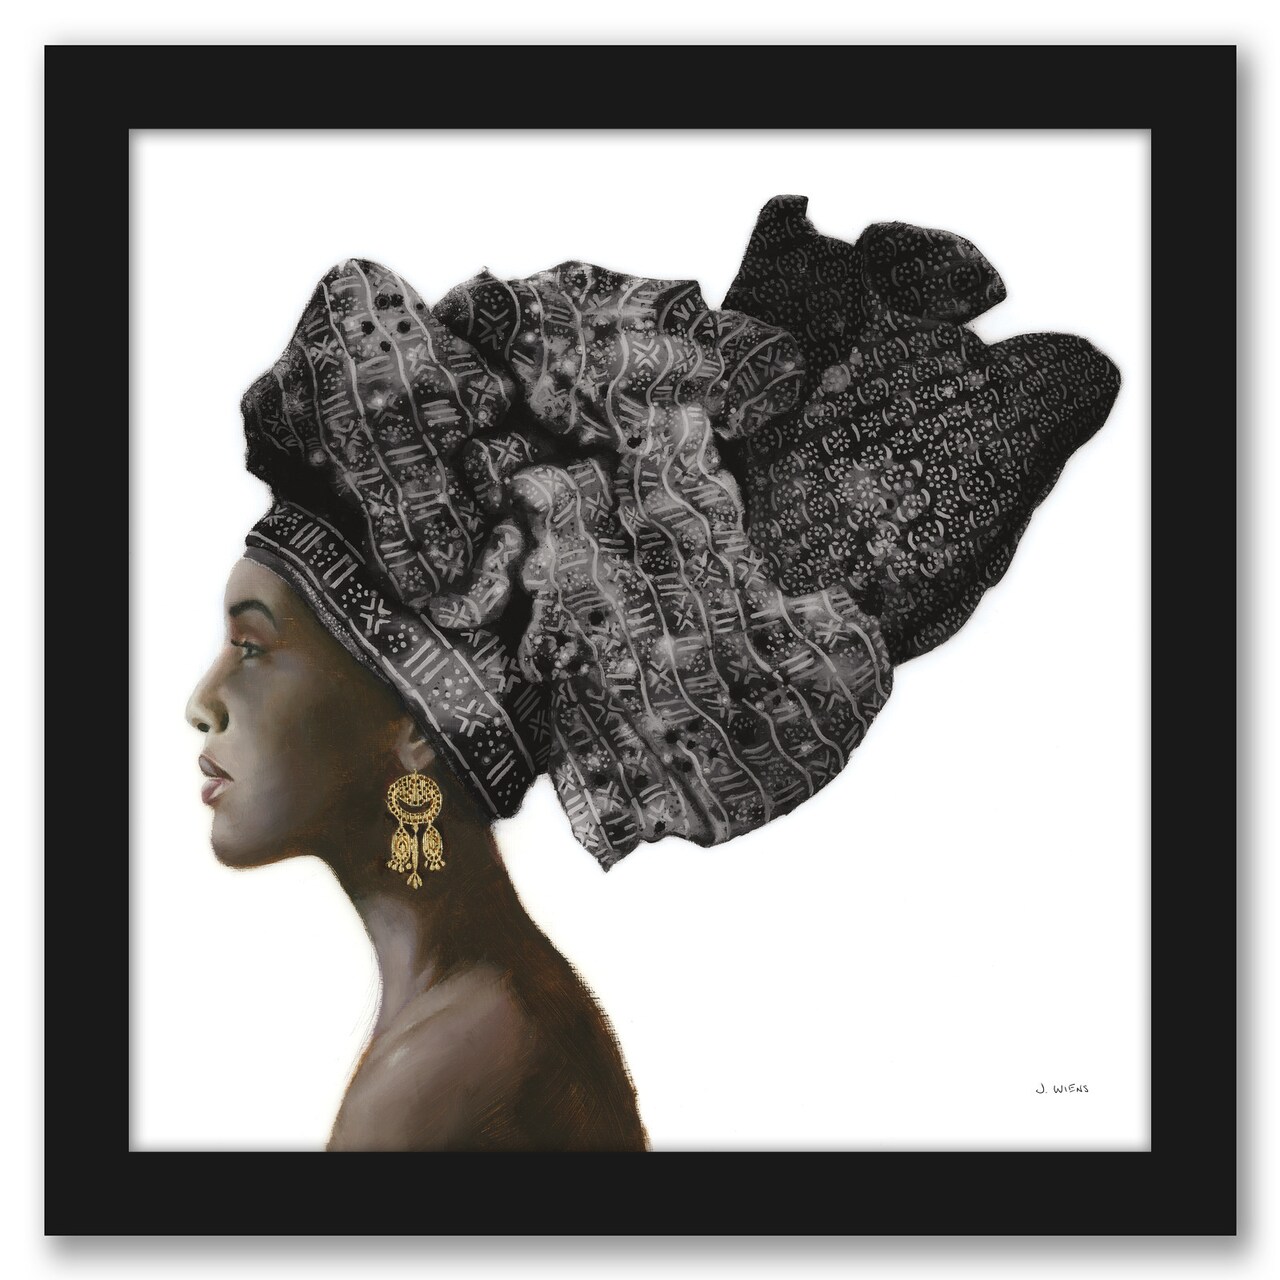 Pure Style Black Wall Art by James Wiens Black Framed Print 11x11 - Americanflat